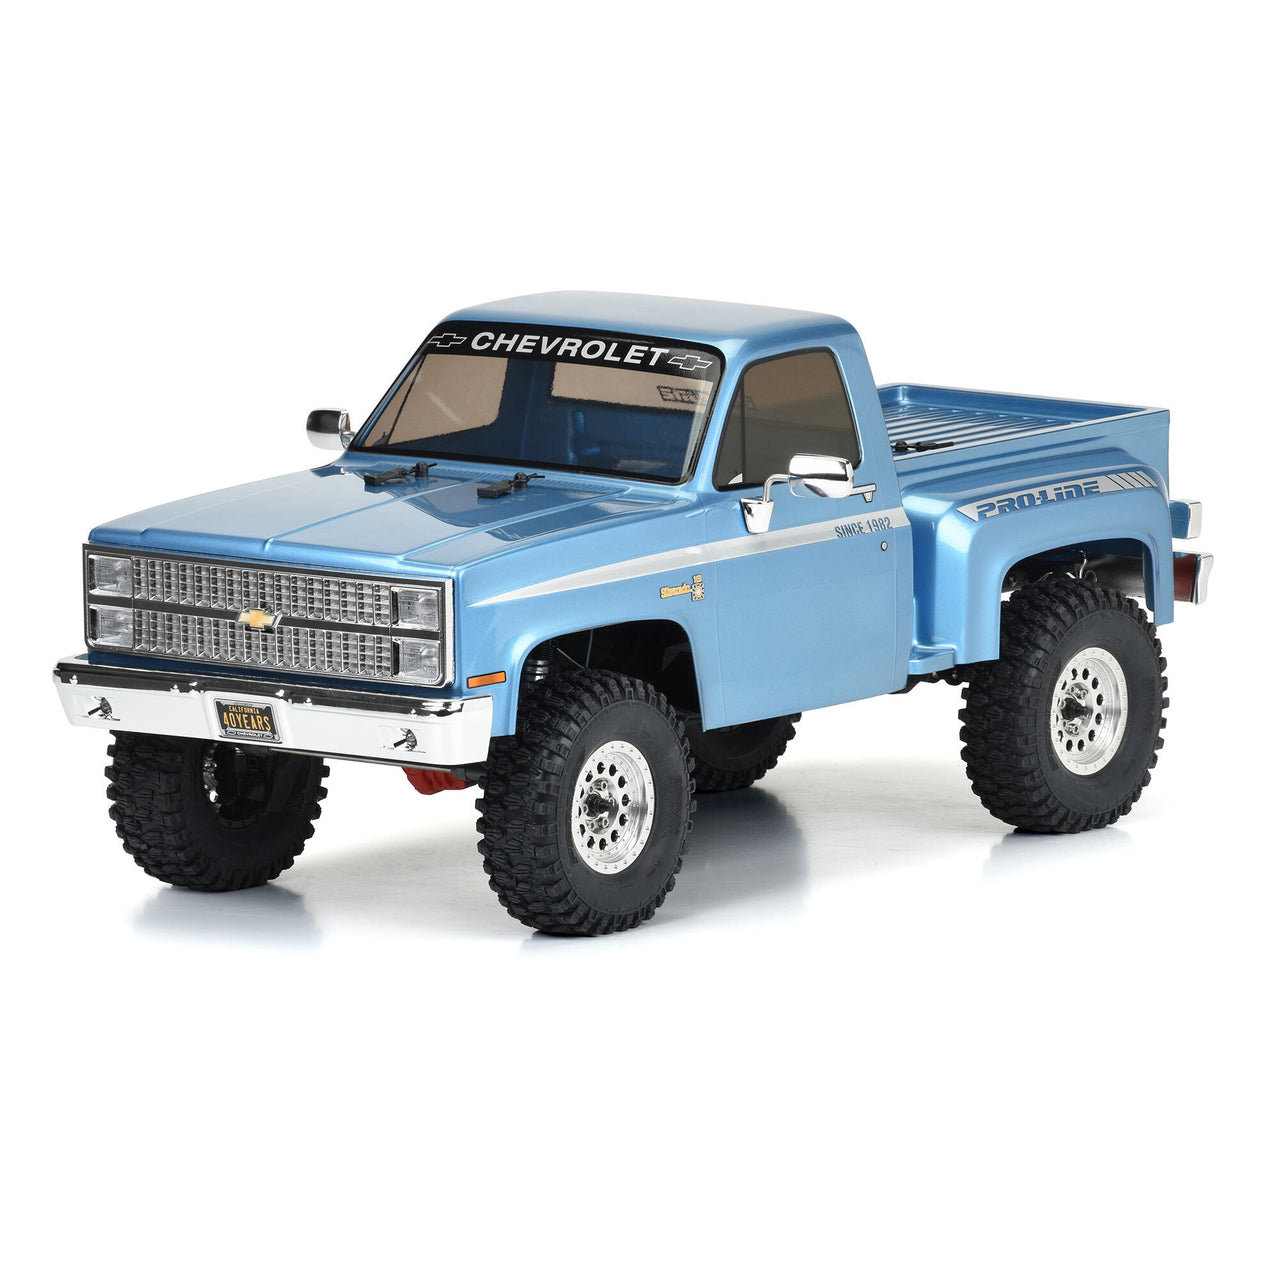 AXI03029 1/10 SCX10 III Pro-Line 1982 Chevy K10 4WD Rock Crawler Brushed RTR